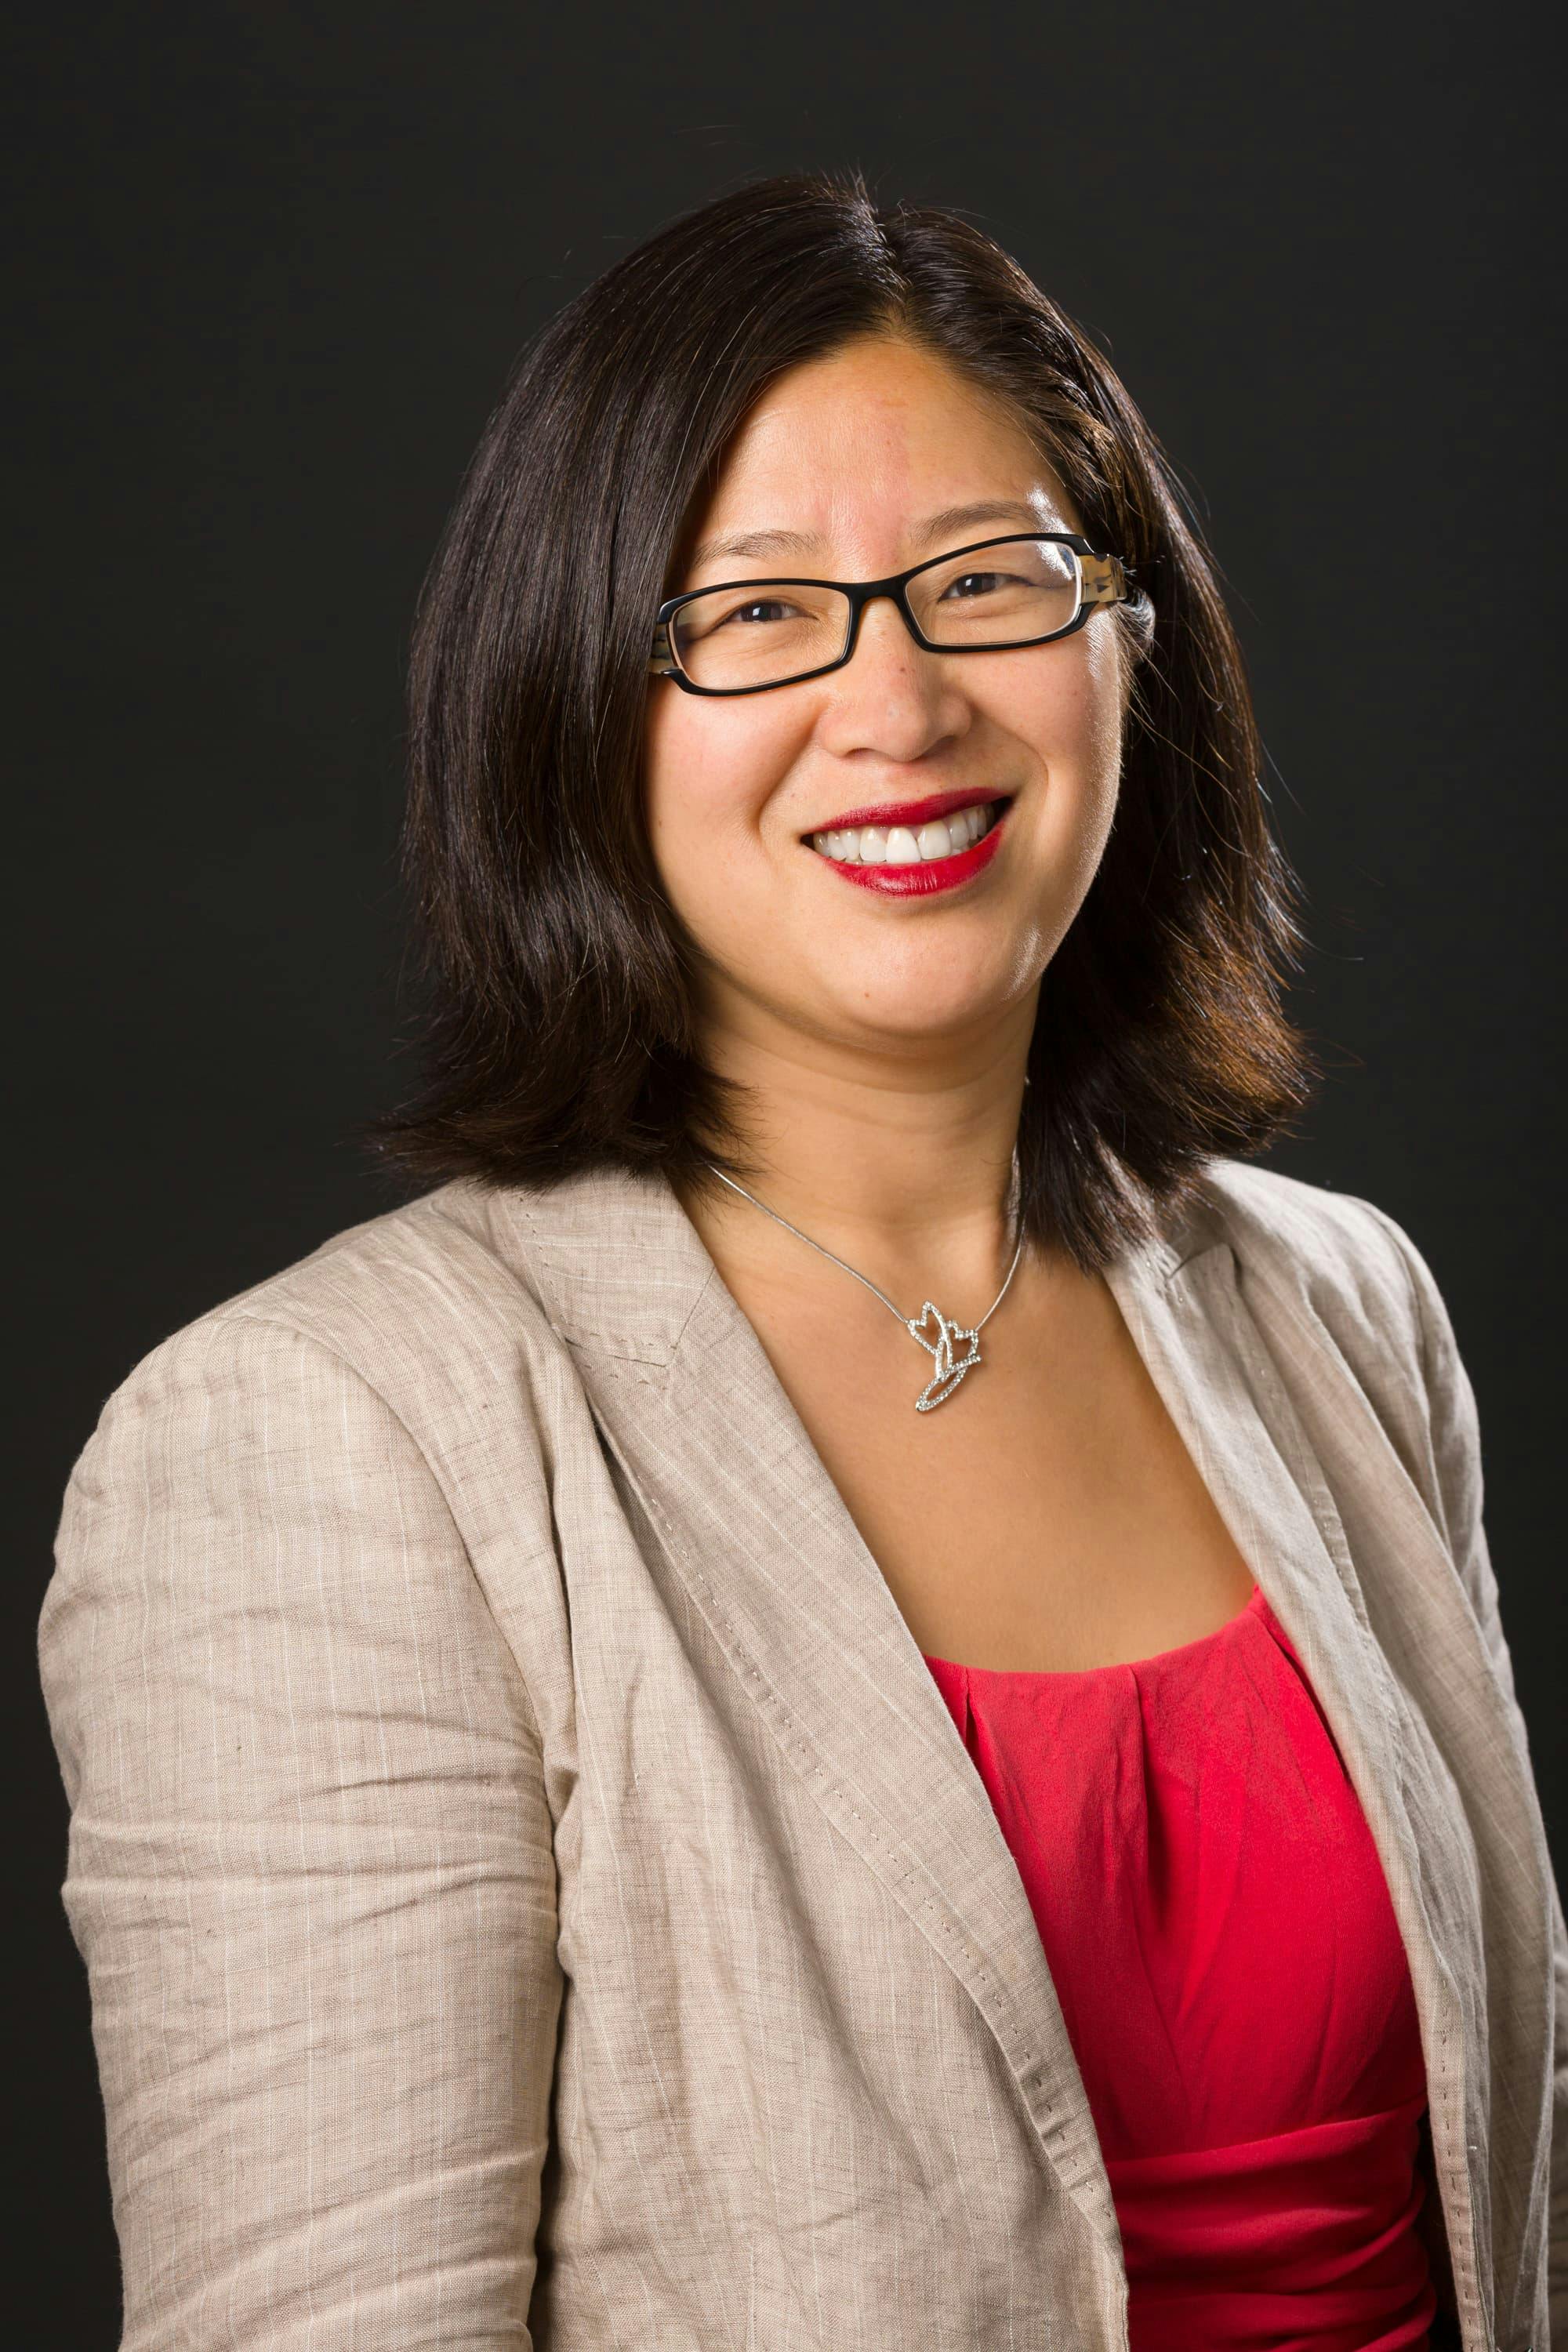 Anne Chiang, MD, PhD
Associate Professor of Medicine
Yale School of Medicine
Chief Integration Officer
Deputy Chief Medical Officer
Smilow Cancer Network
New Haven, CT